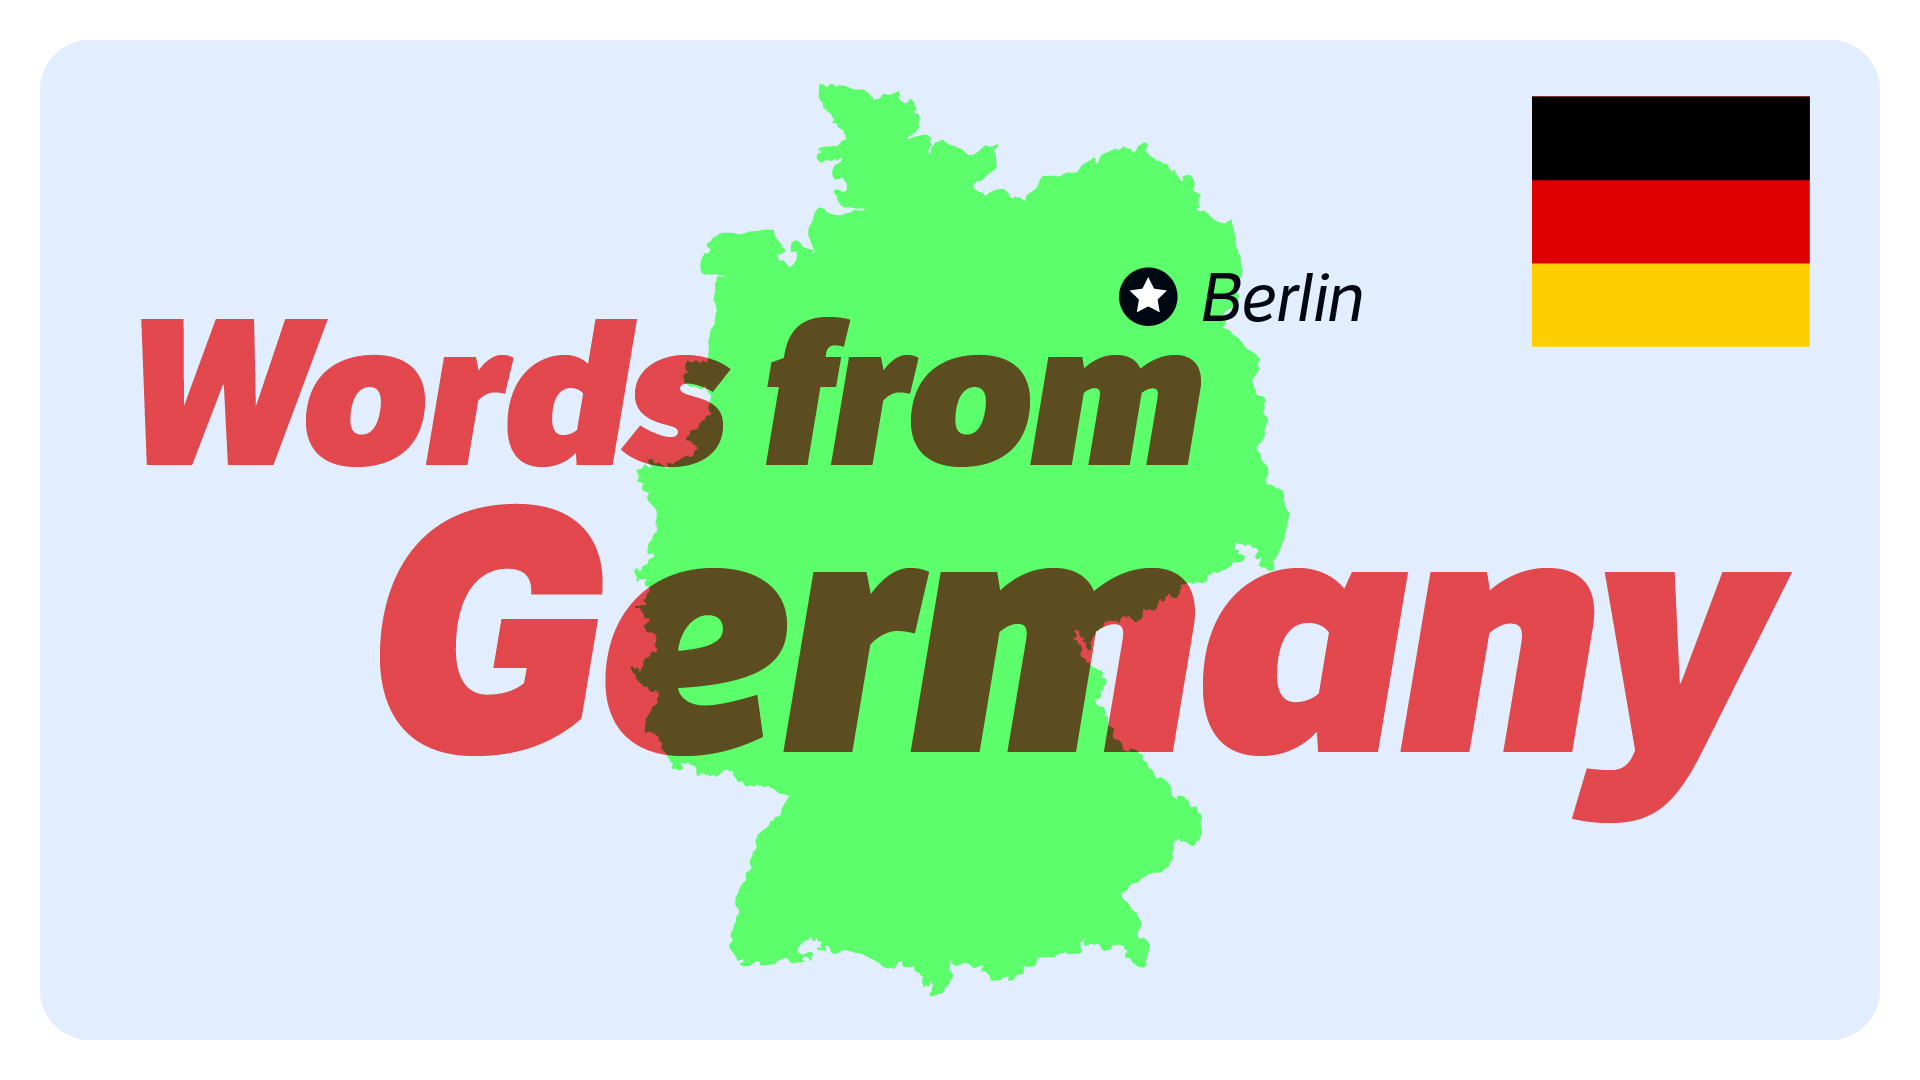 English Could Really Use These 15 "Wunderbar" German Words